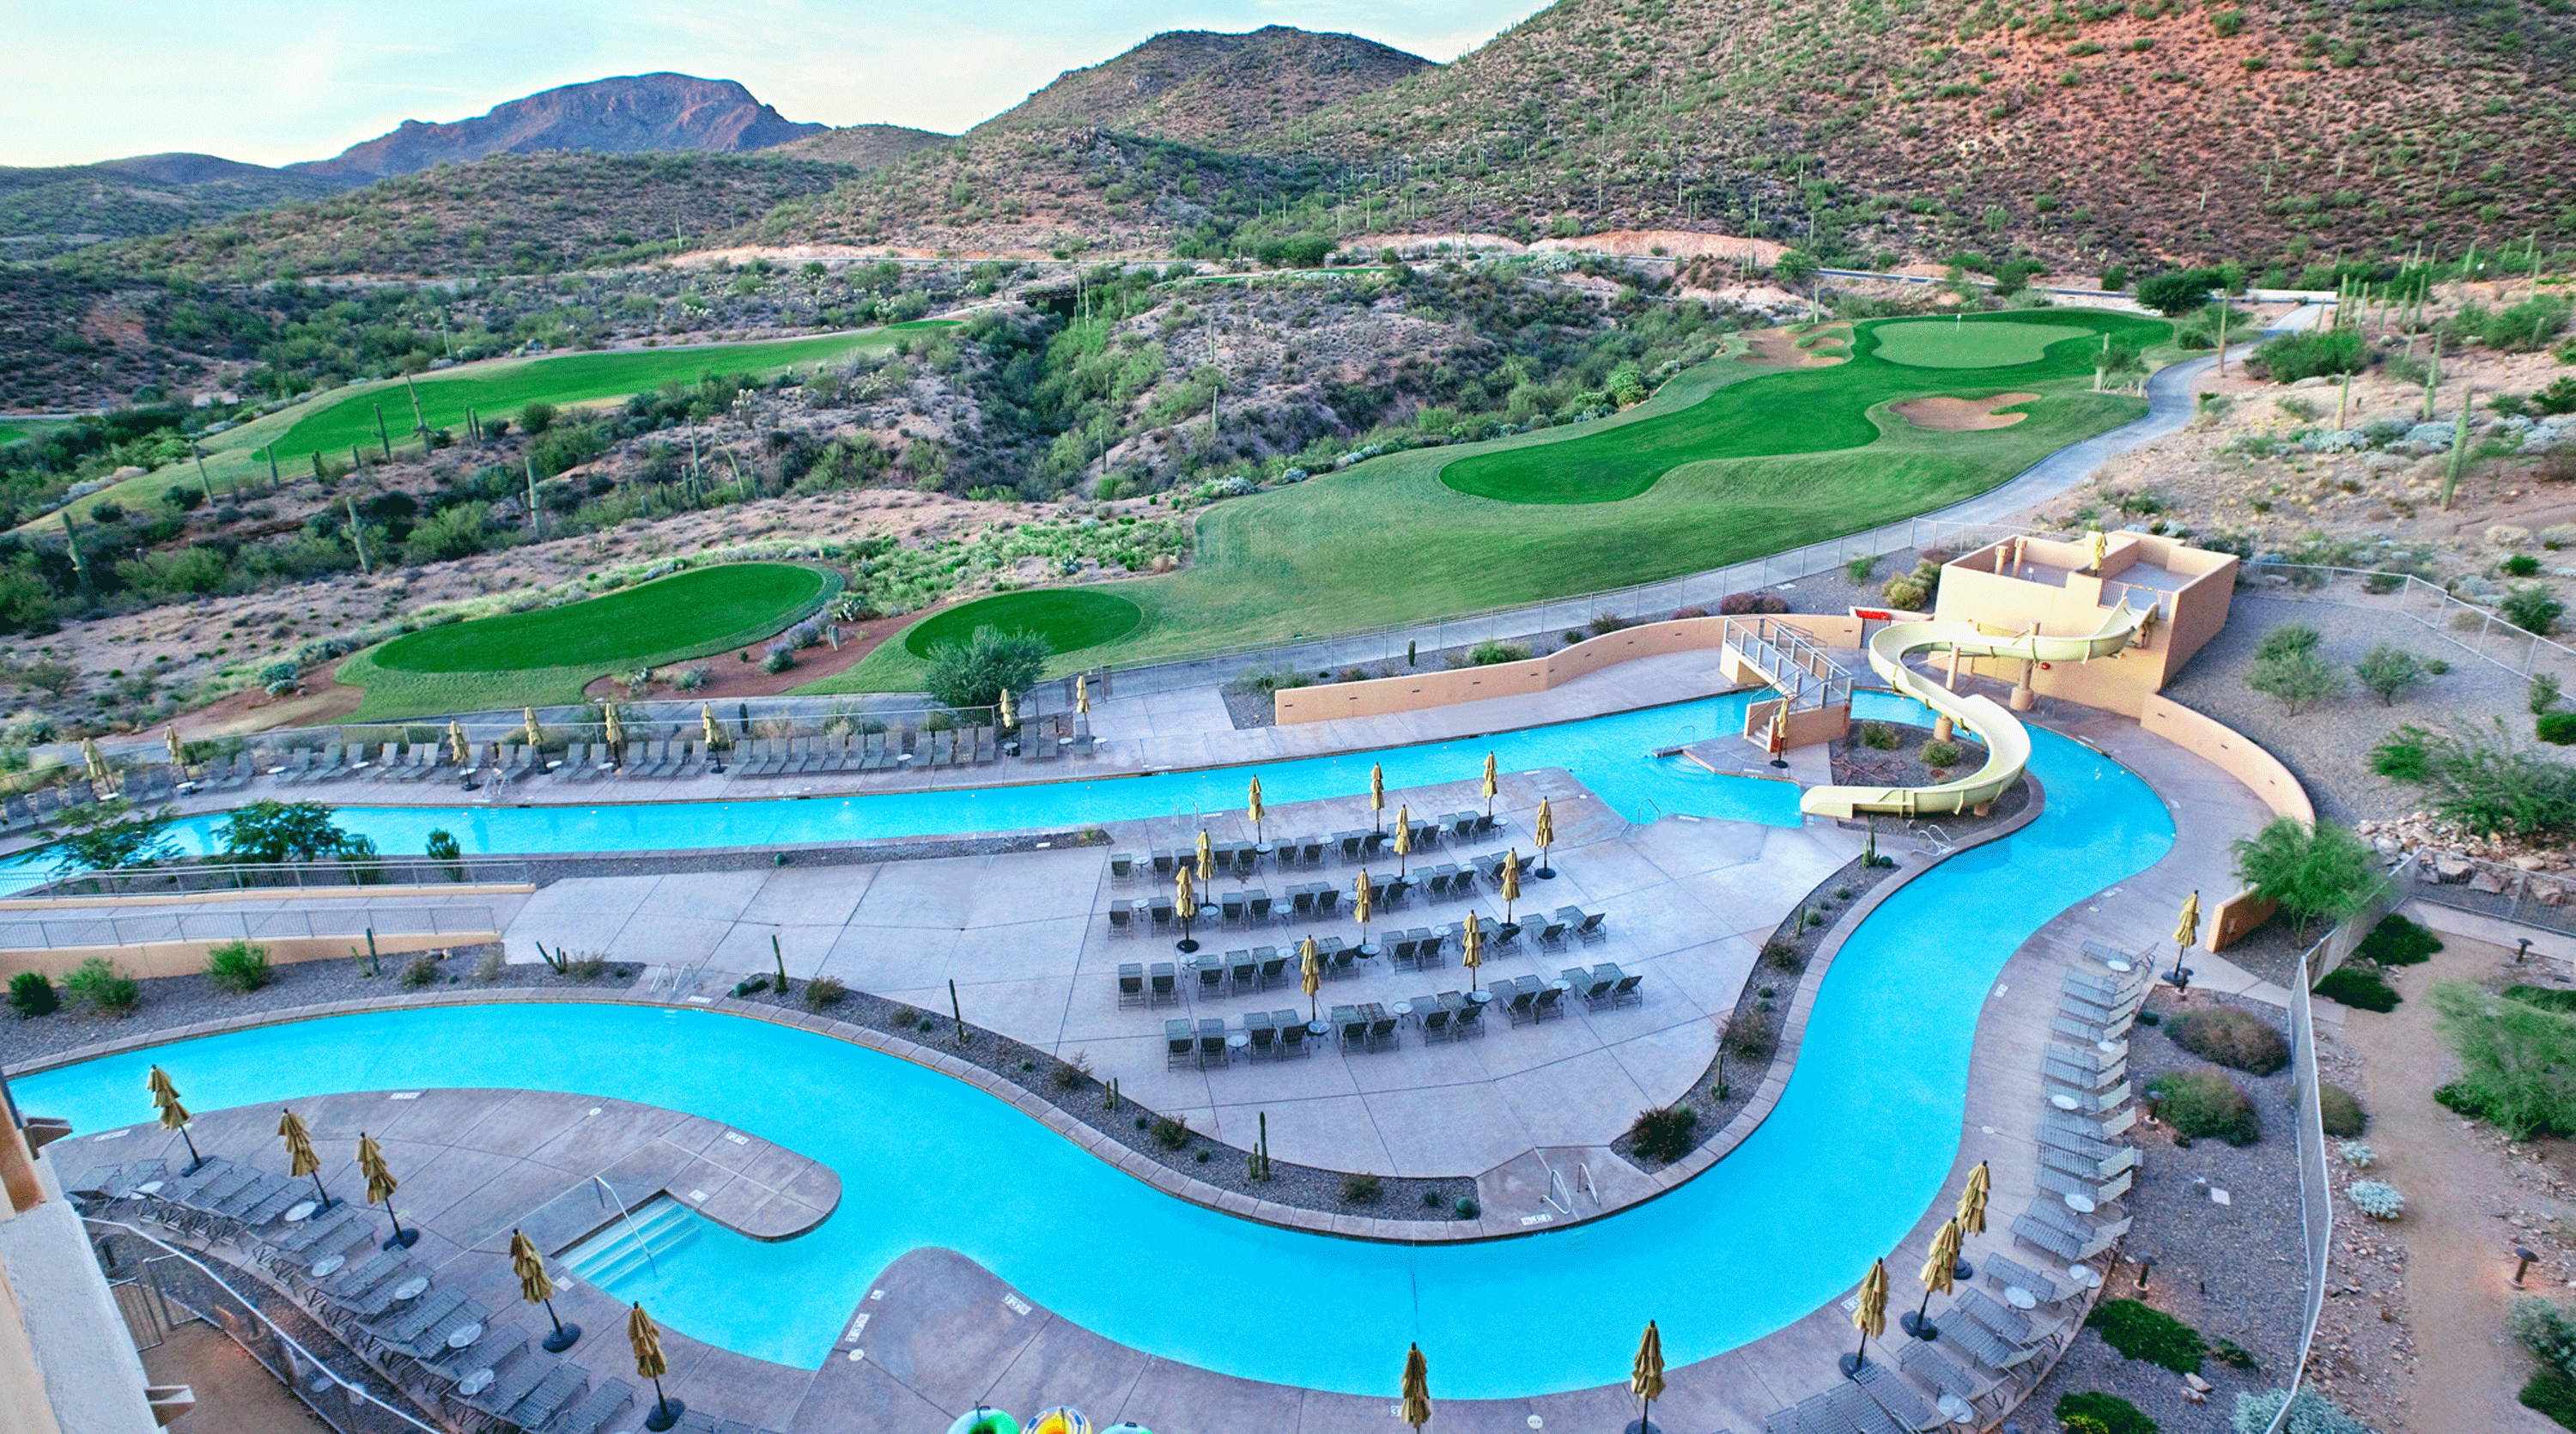 The pool at the JW Marriott Tucson Starr Pass looks out onto the golf course.